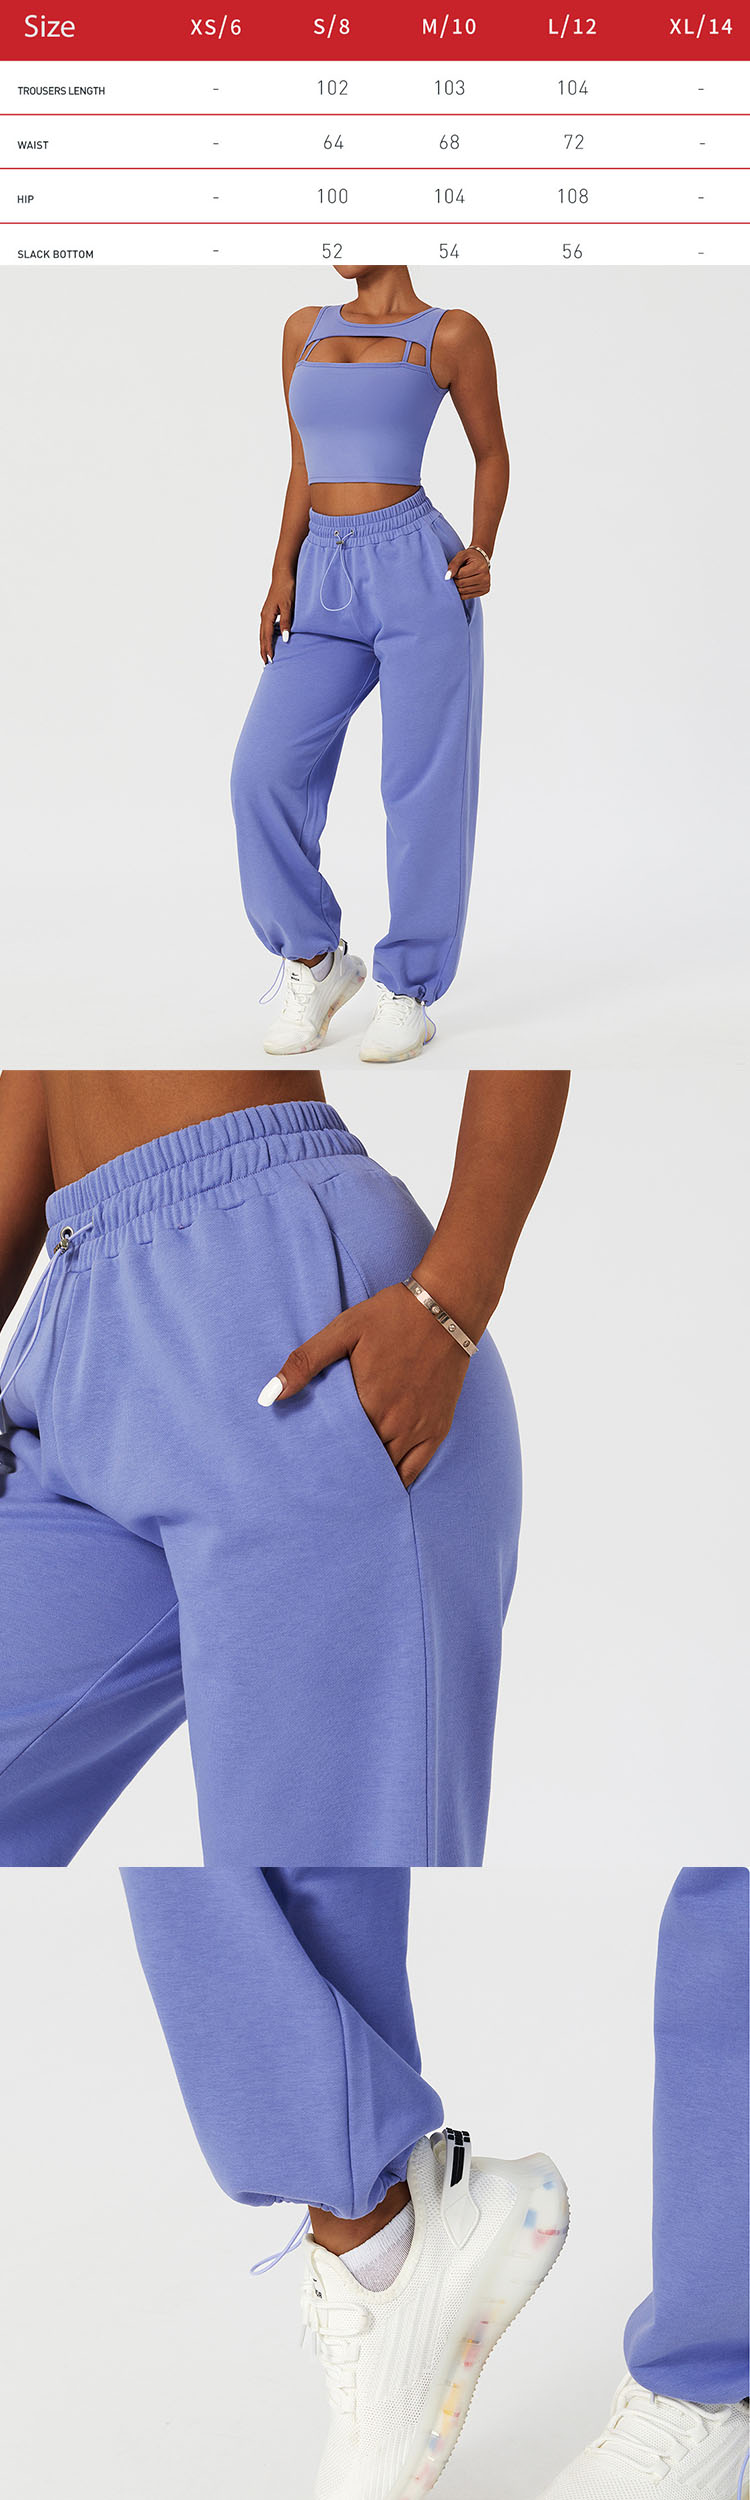 The high-waisted body design is an important process design for jean yoga pants